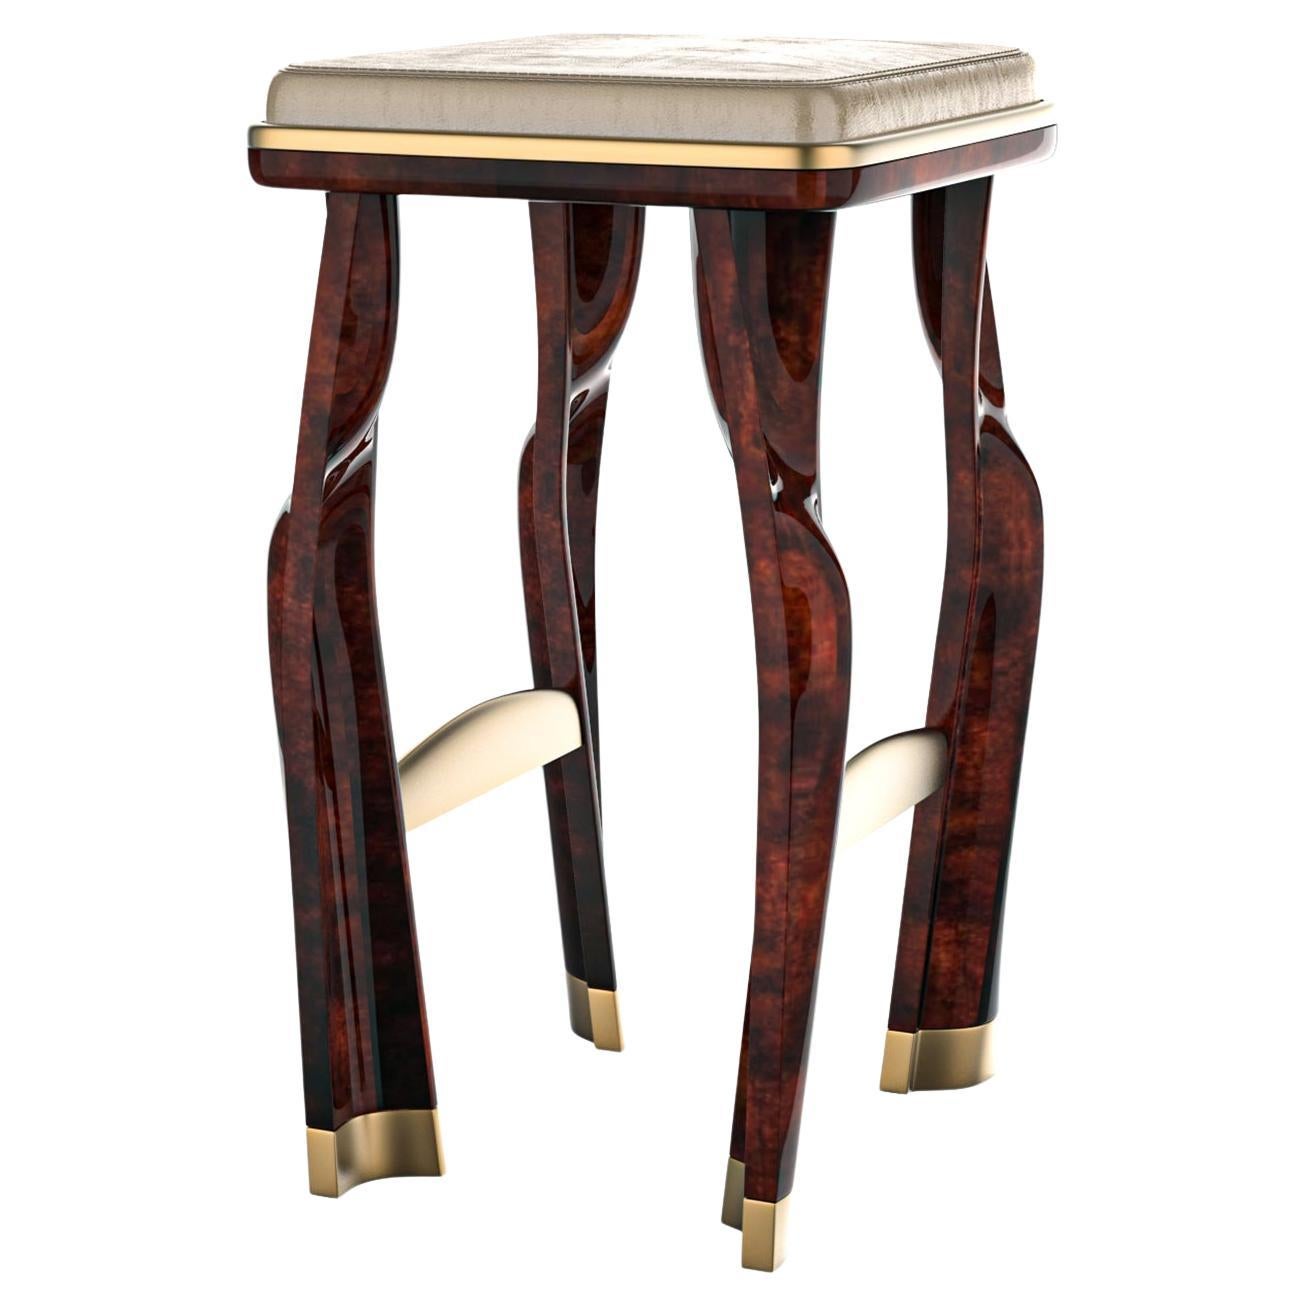 "Pera" Bar Stool with Burl Walnut and Bronze Details, Hand Crafted, Istanbul For Sale